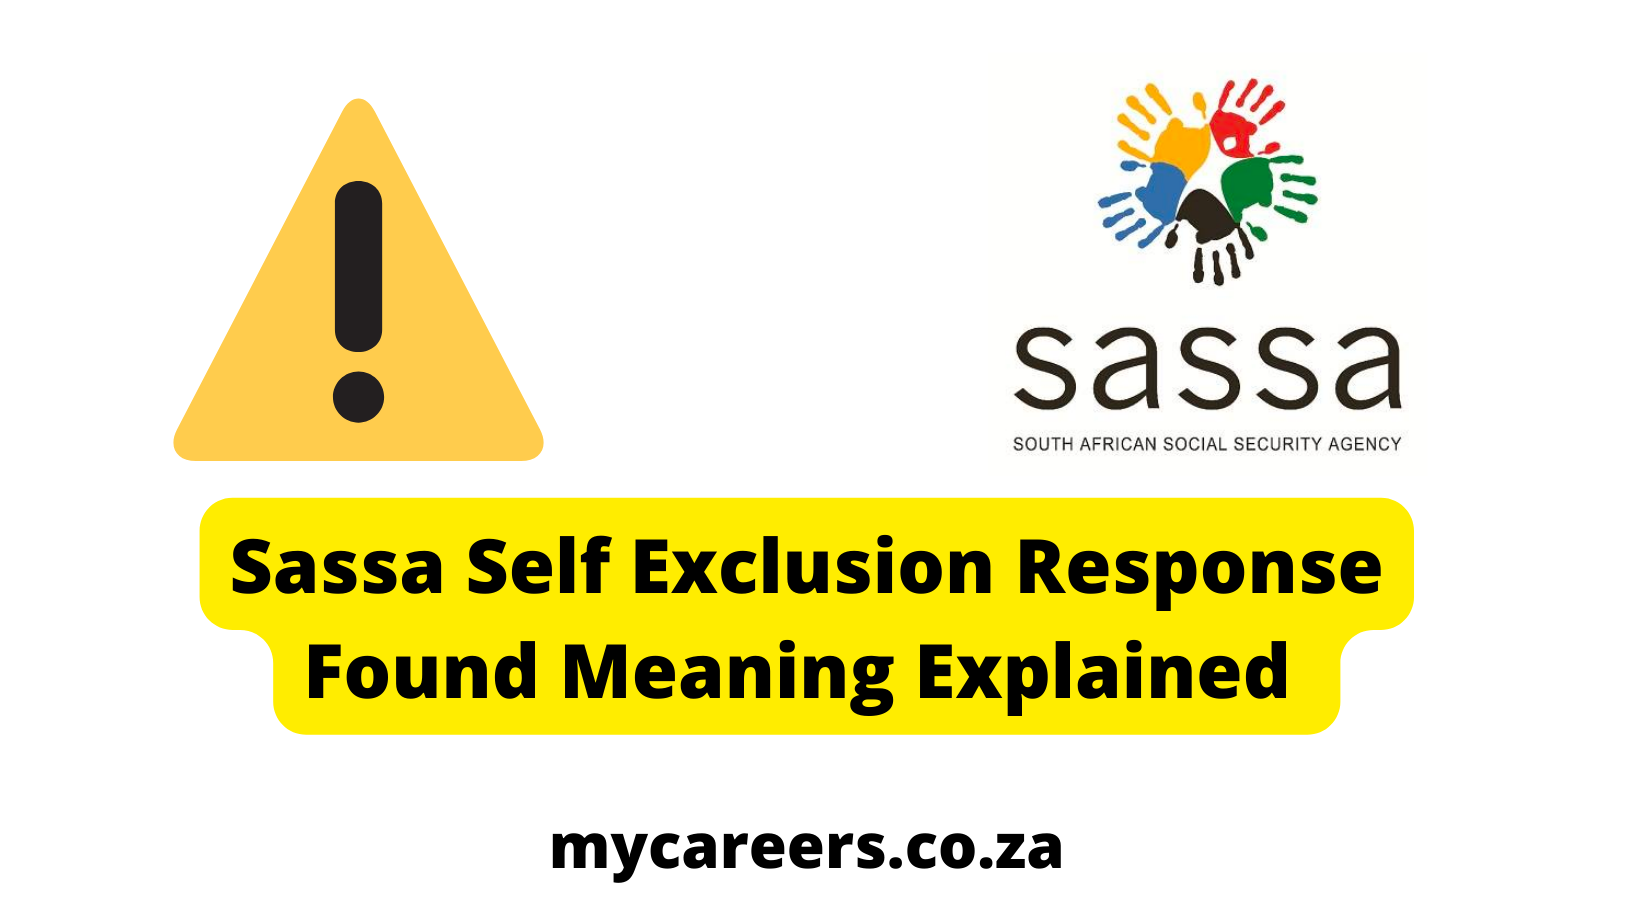 Sassa Self Exclusion Response Found Meaning Explained